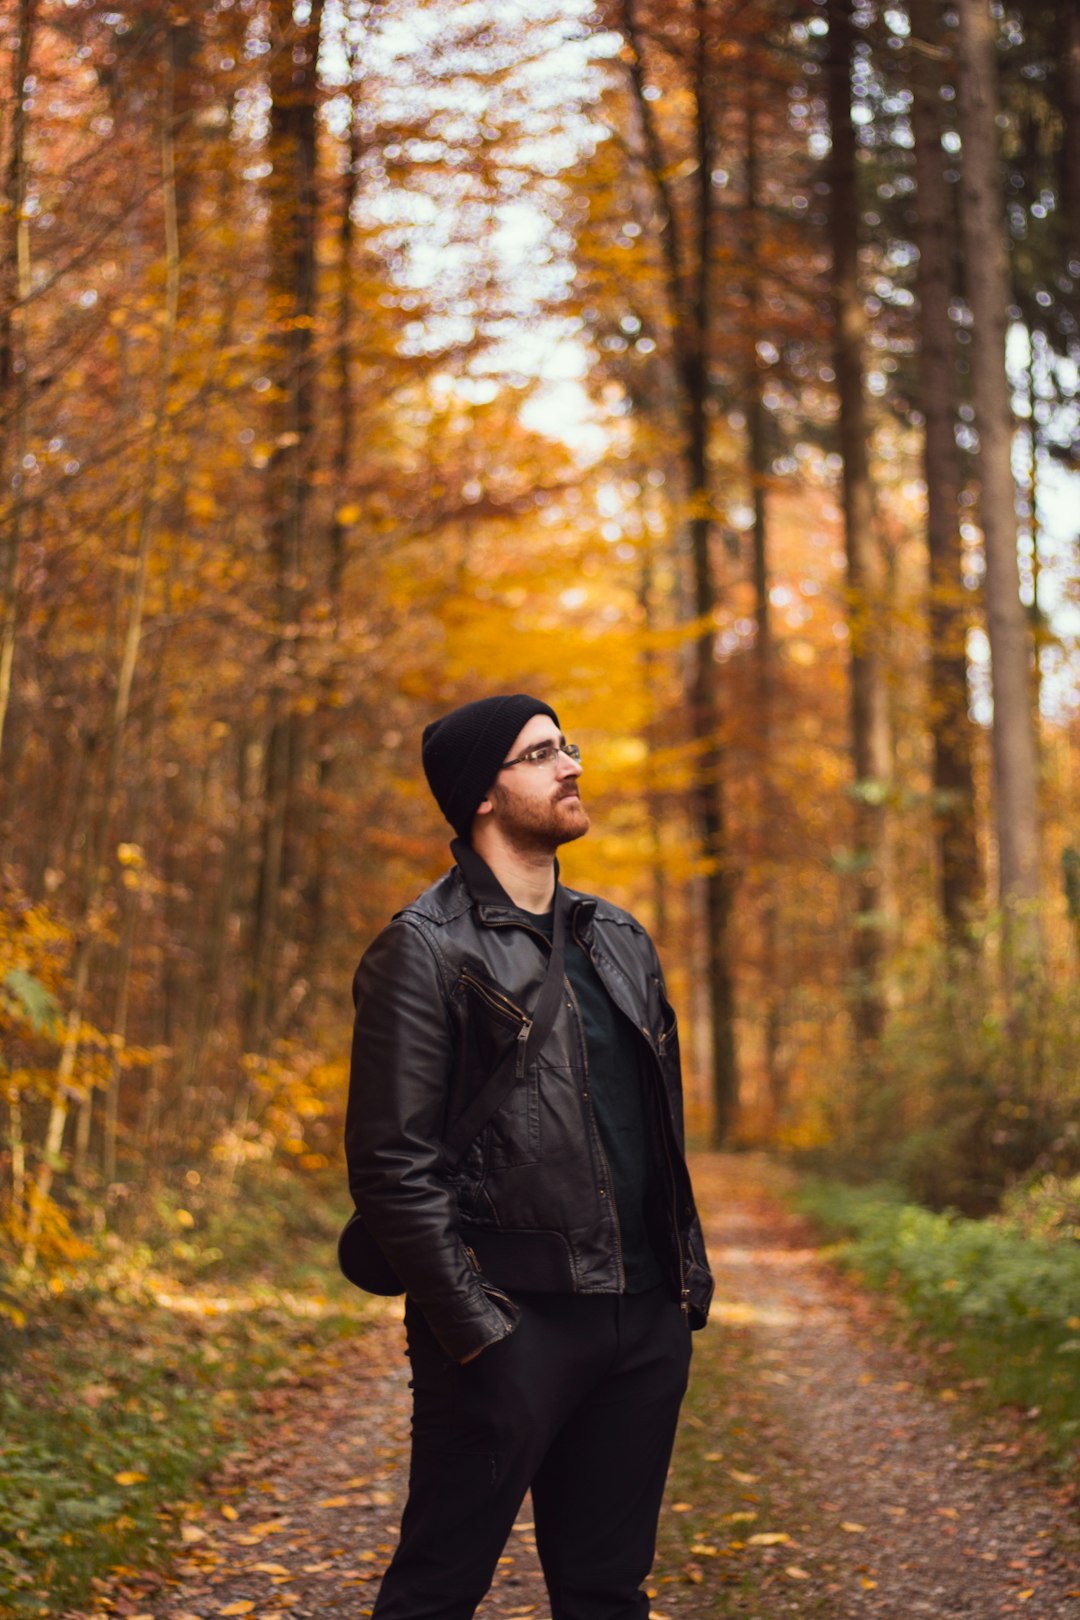 man in black jacket and black knit cap standing in forest during daytime